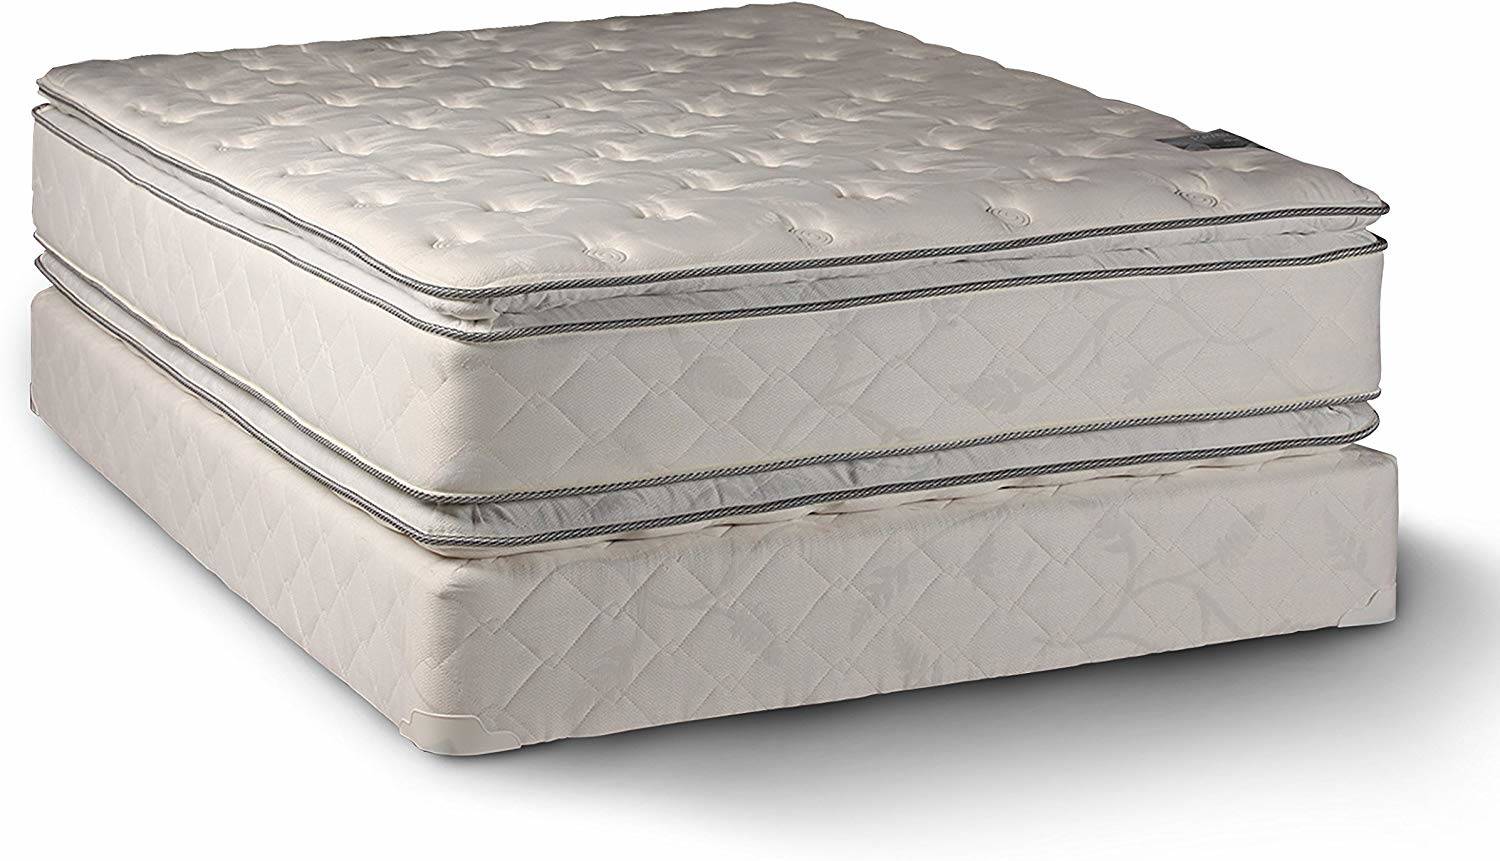 double-sided pillow top mattresses